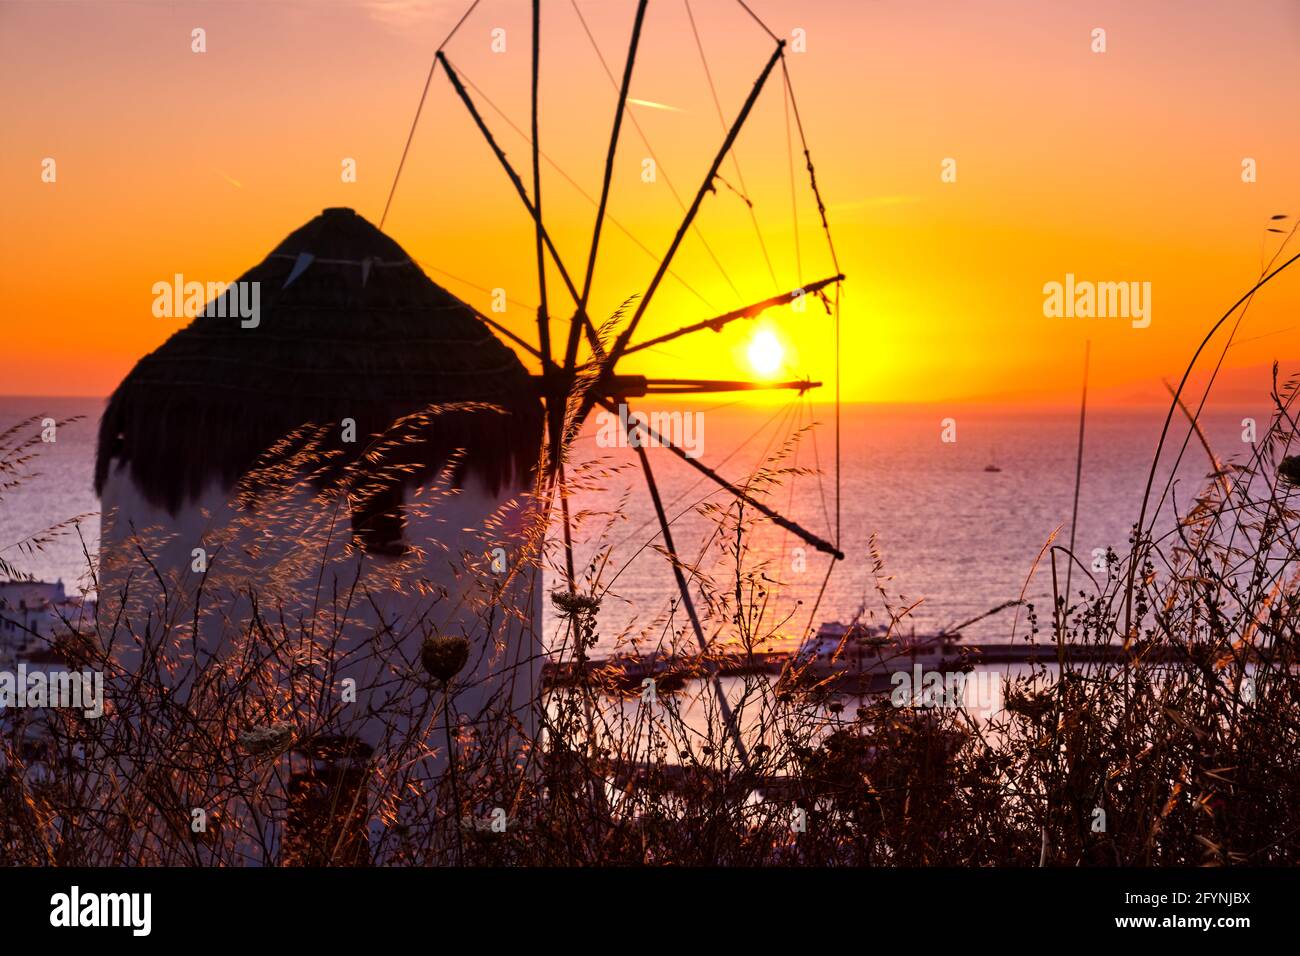 Famous traditional Greek windmill, Mykonos, Greece against sunset. Beautiful sky, sun touch sea horizon, high grass in foreground, colorful image. Stock Photo